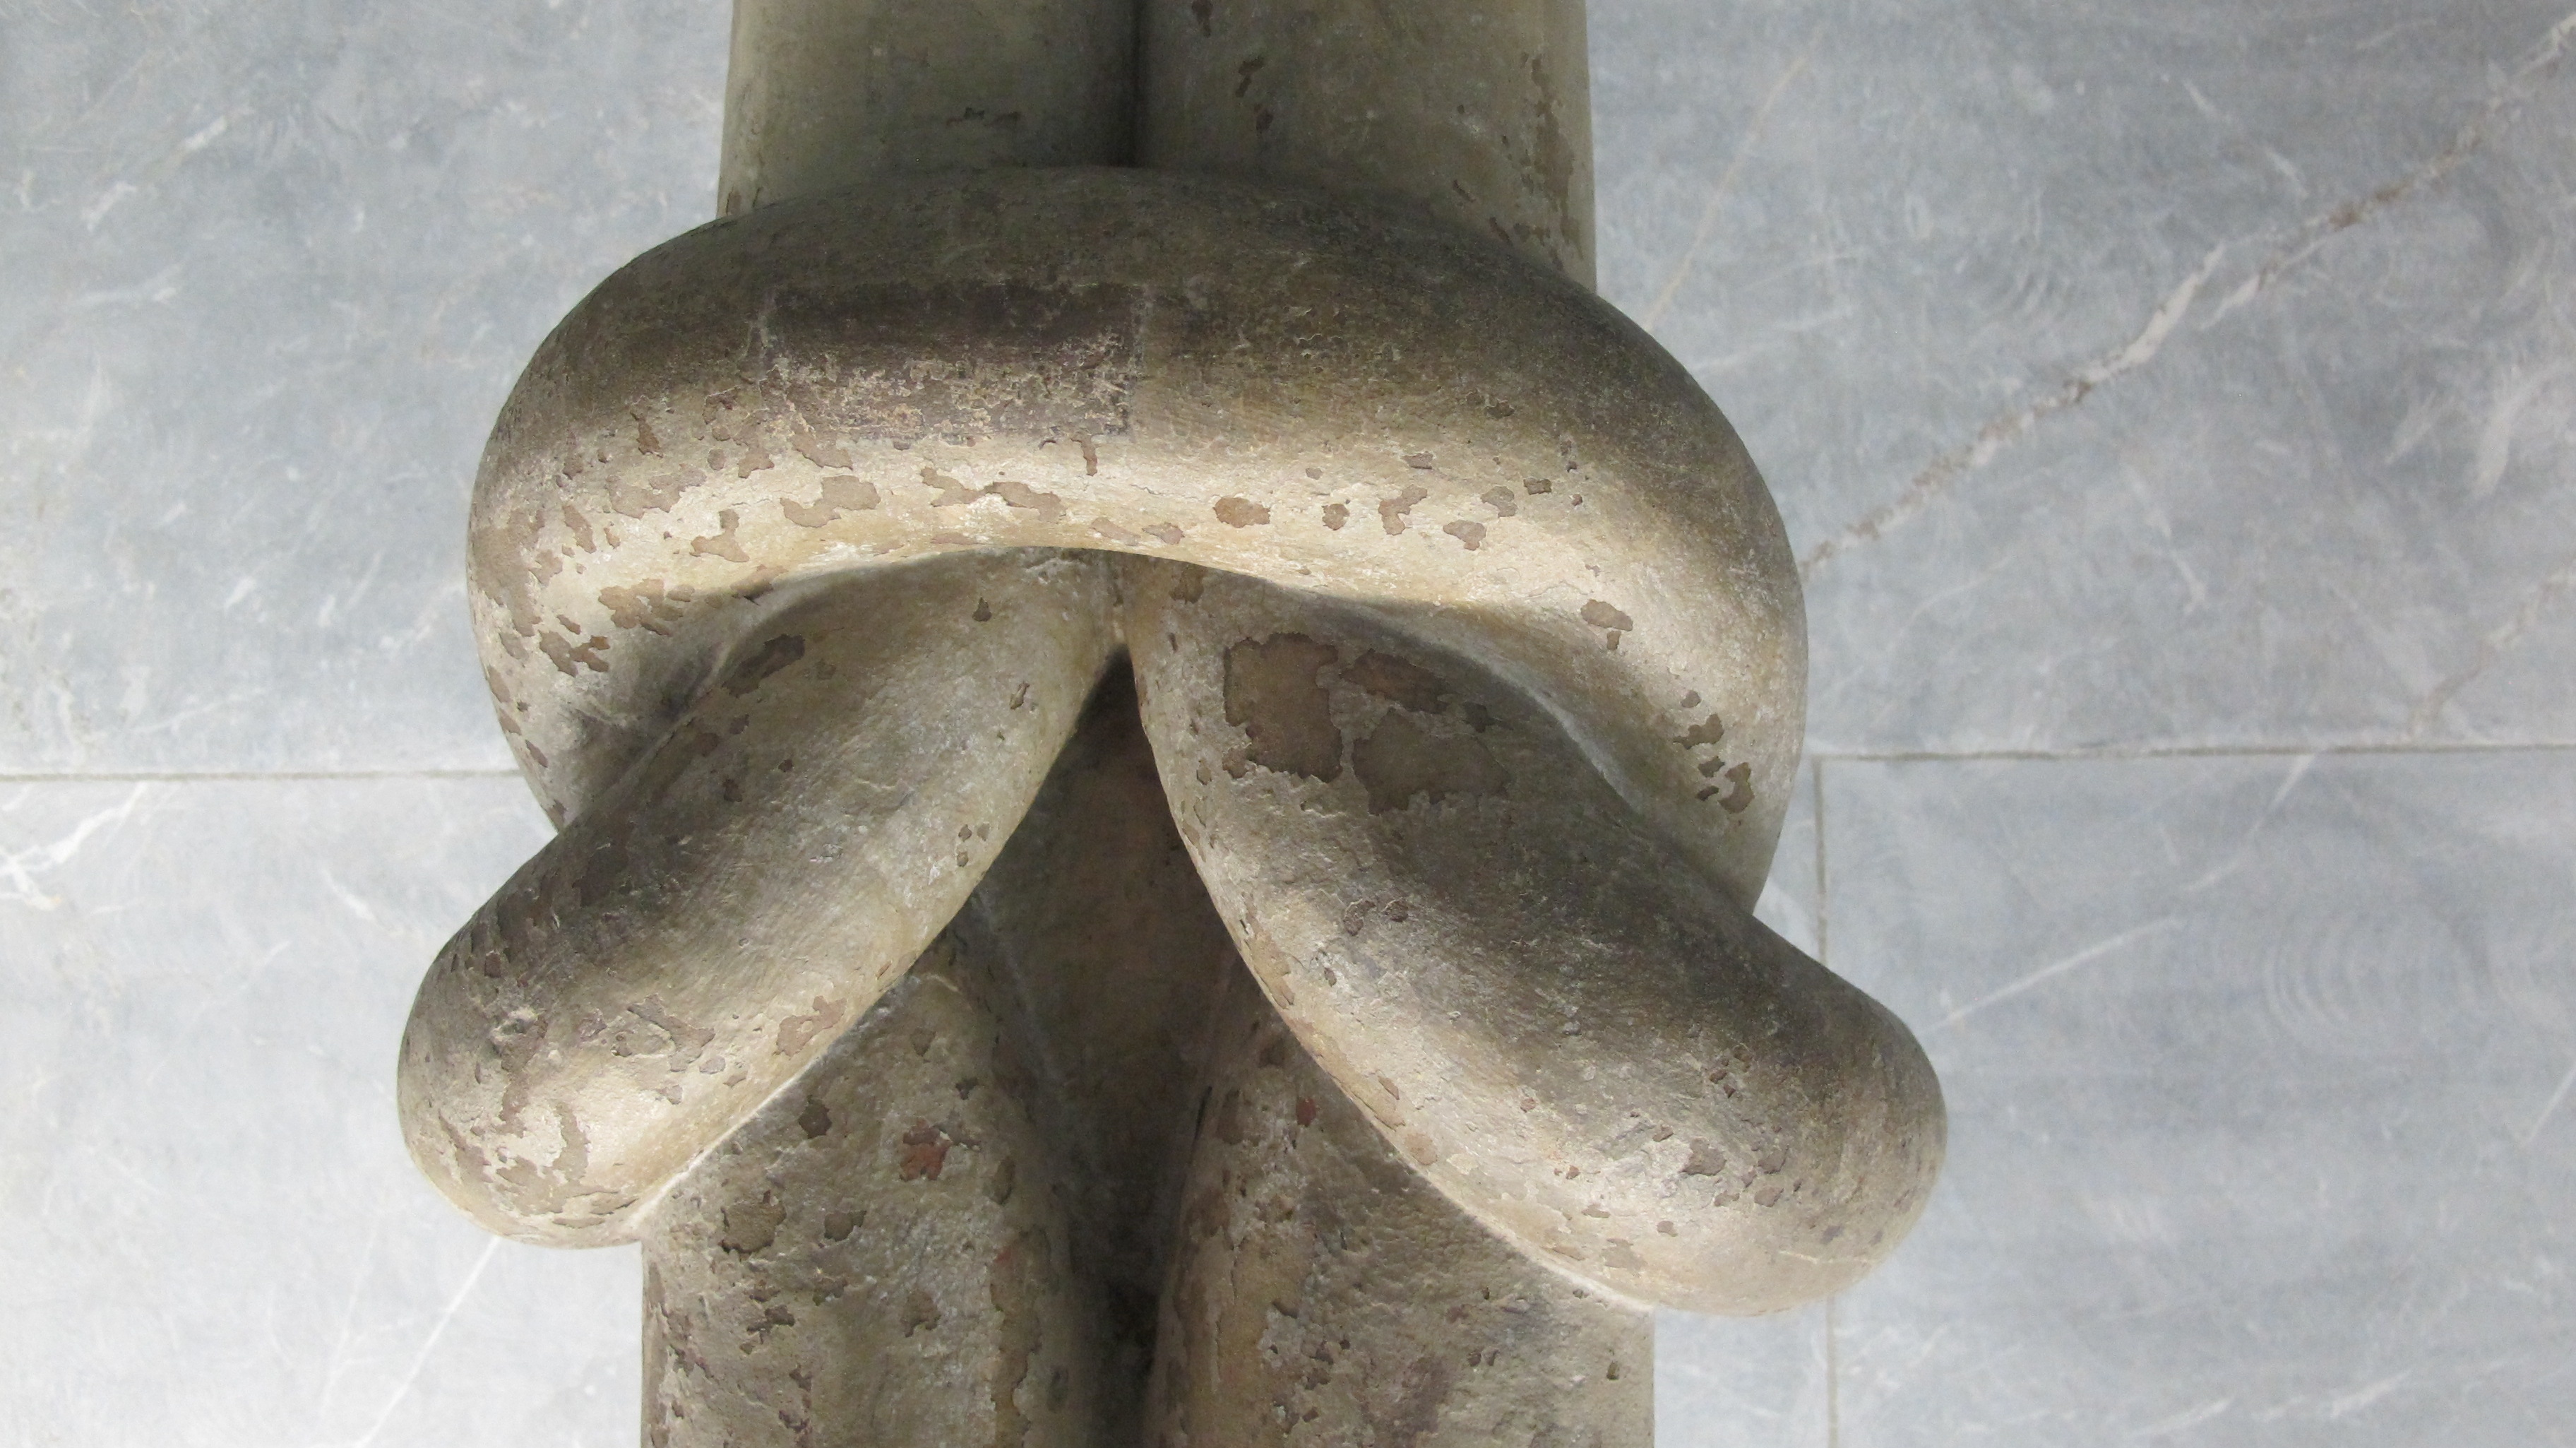 A dream about wrestling. Detail of a column in the Wurzburg Cathedral, shaped in a knot. Photo by Barbara Newhall